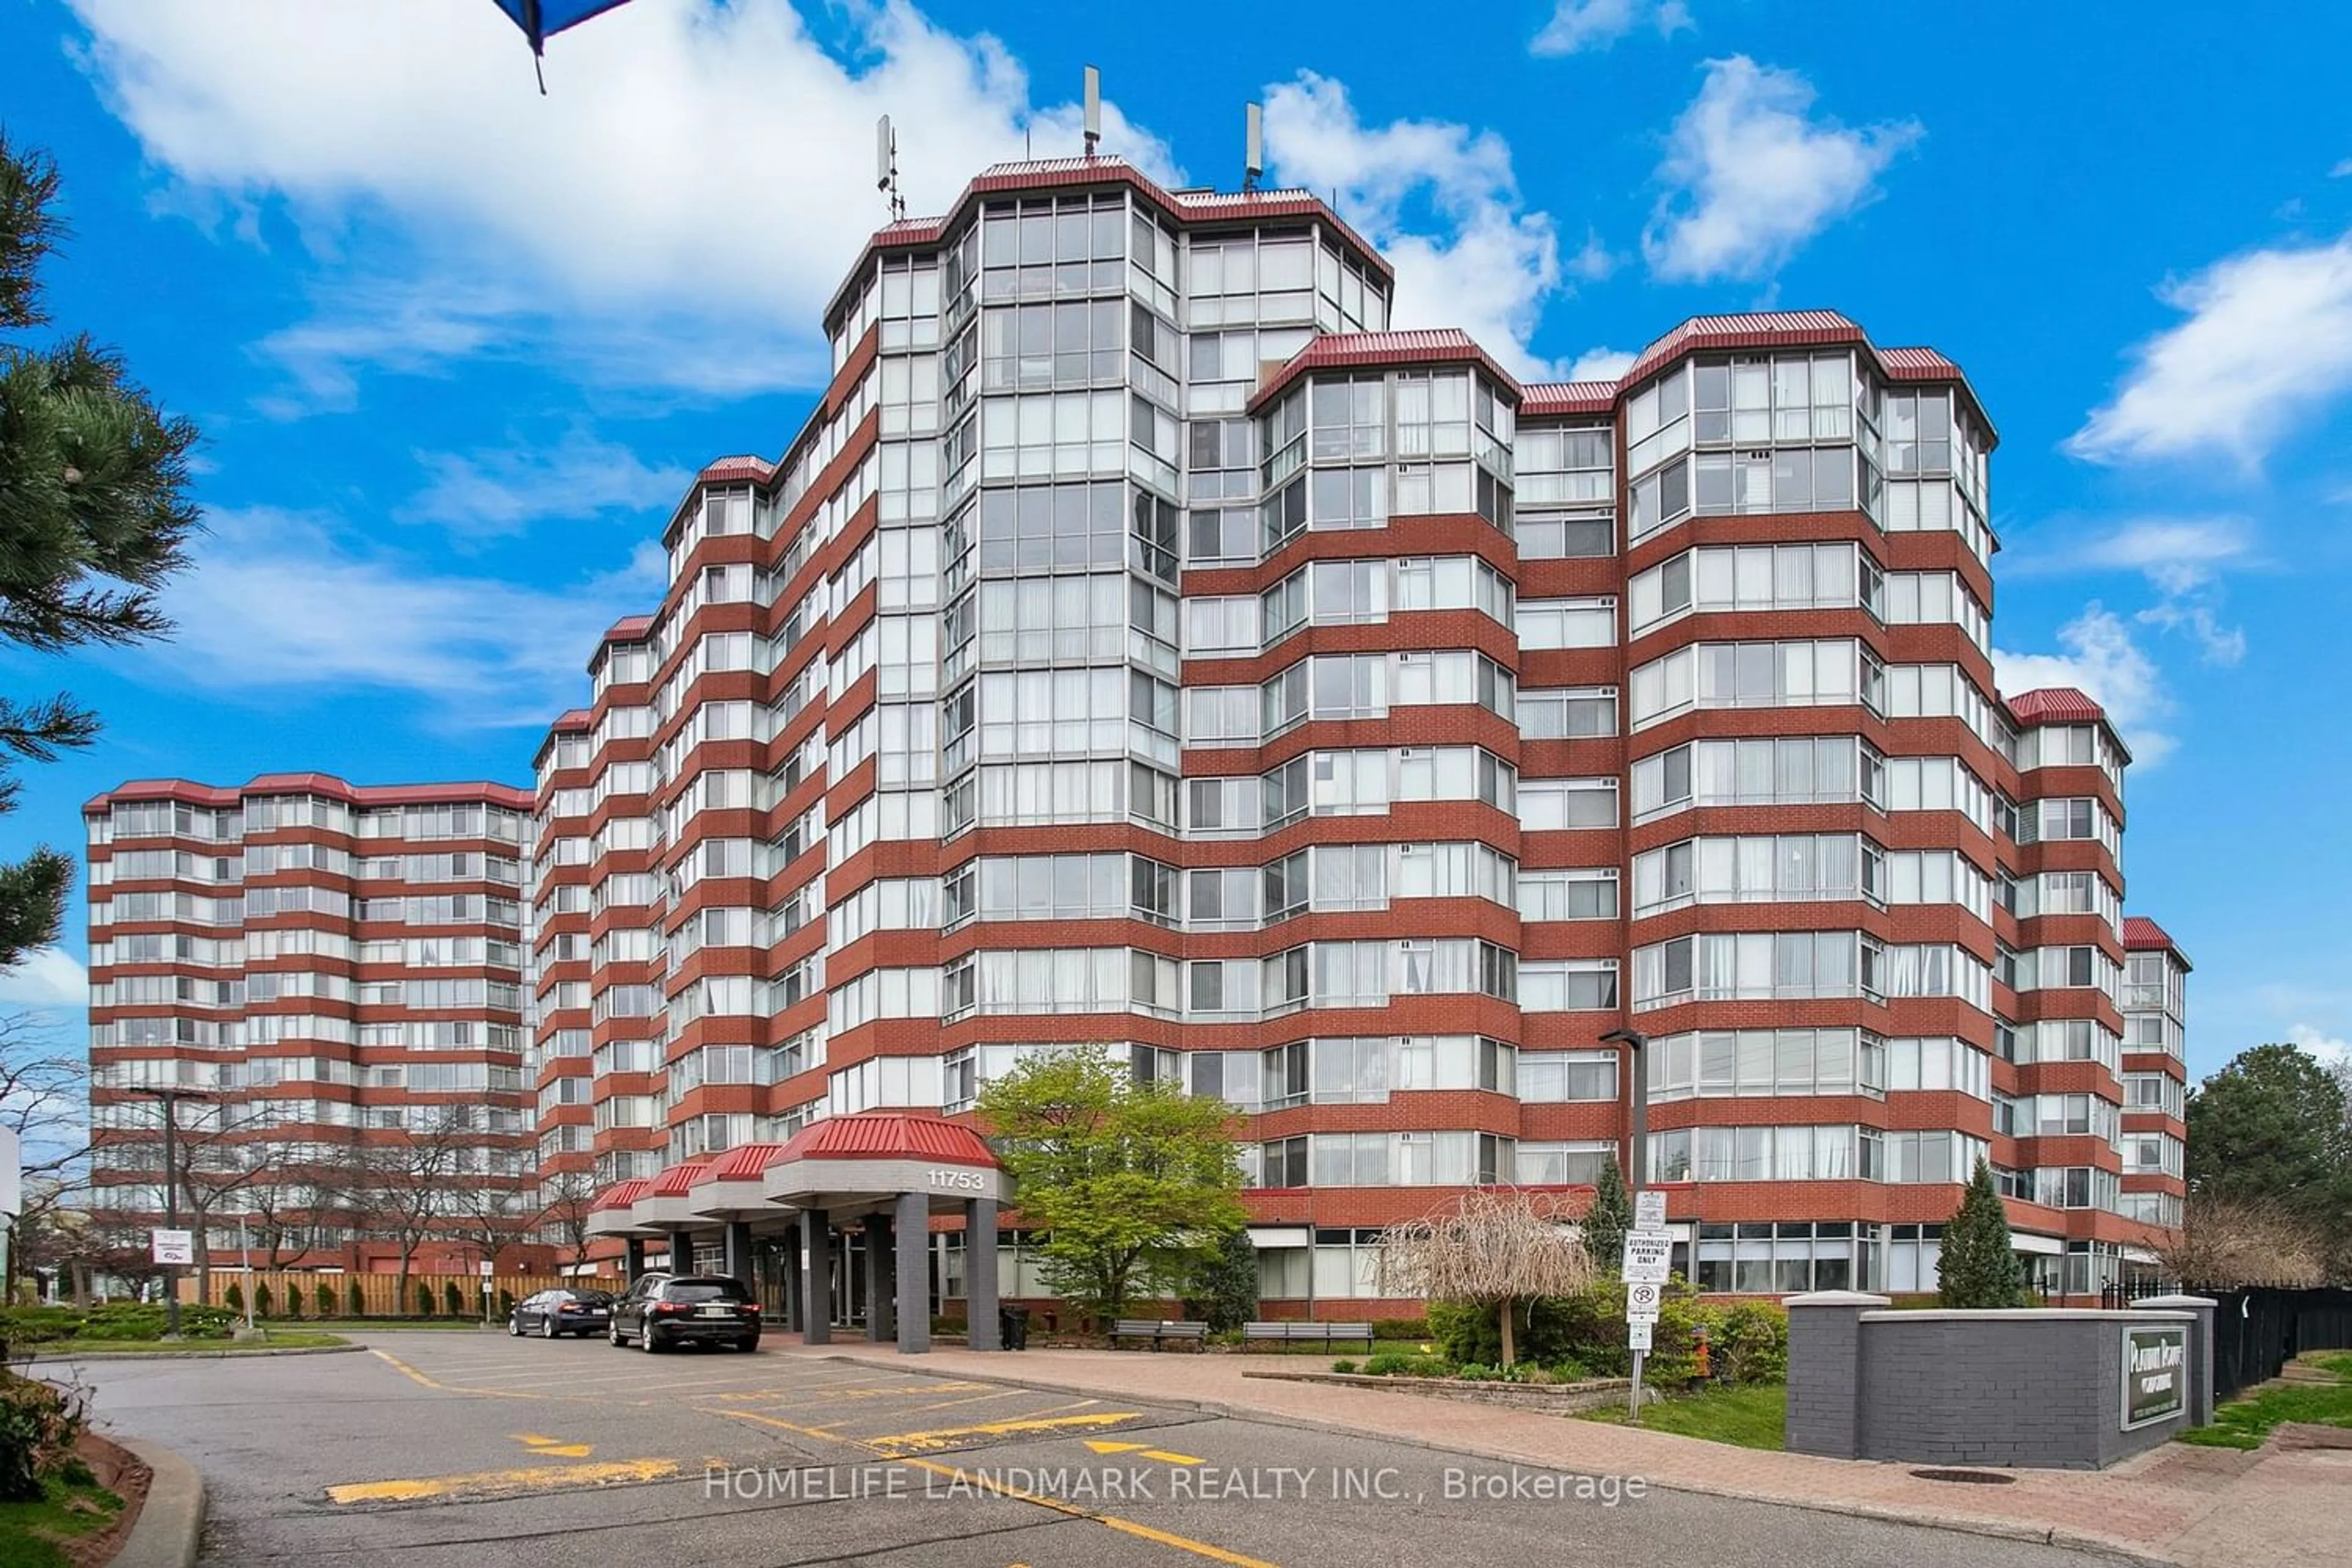 A pic from exterior of the house or condo for 11753 Sheppard Ave #721, Toronto Ontario M1B 5M3